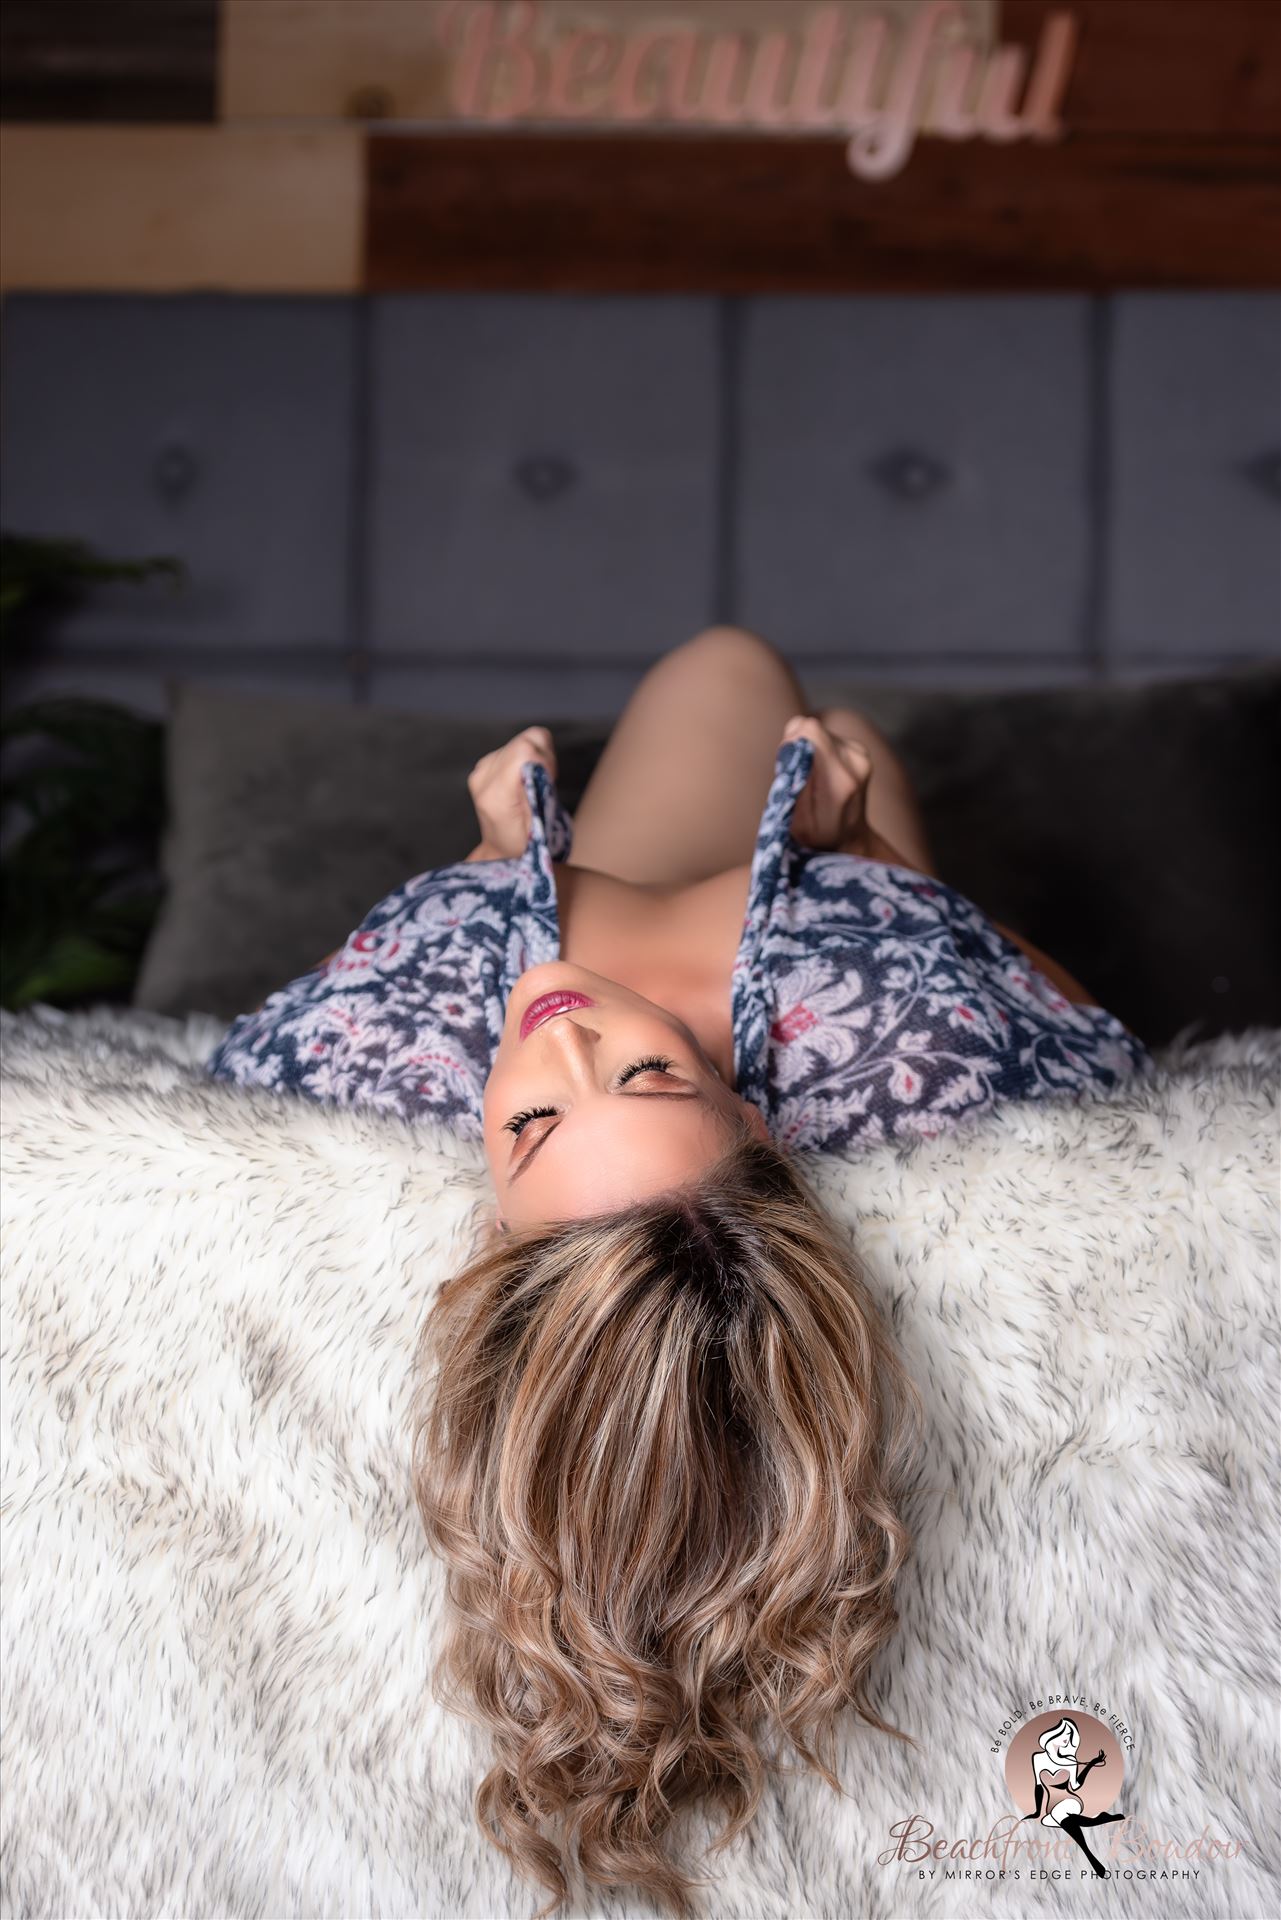 Port-2405.JPG - Beachfront Boudoir by Mirror's Edge Photography is a Boutique Luxury Boudoir Photography Studio located just blocks from the beach in Oceano, California. My mission is to show as many women as possible how beautiful they truly are! by Sarah Williams